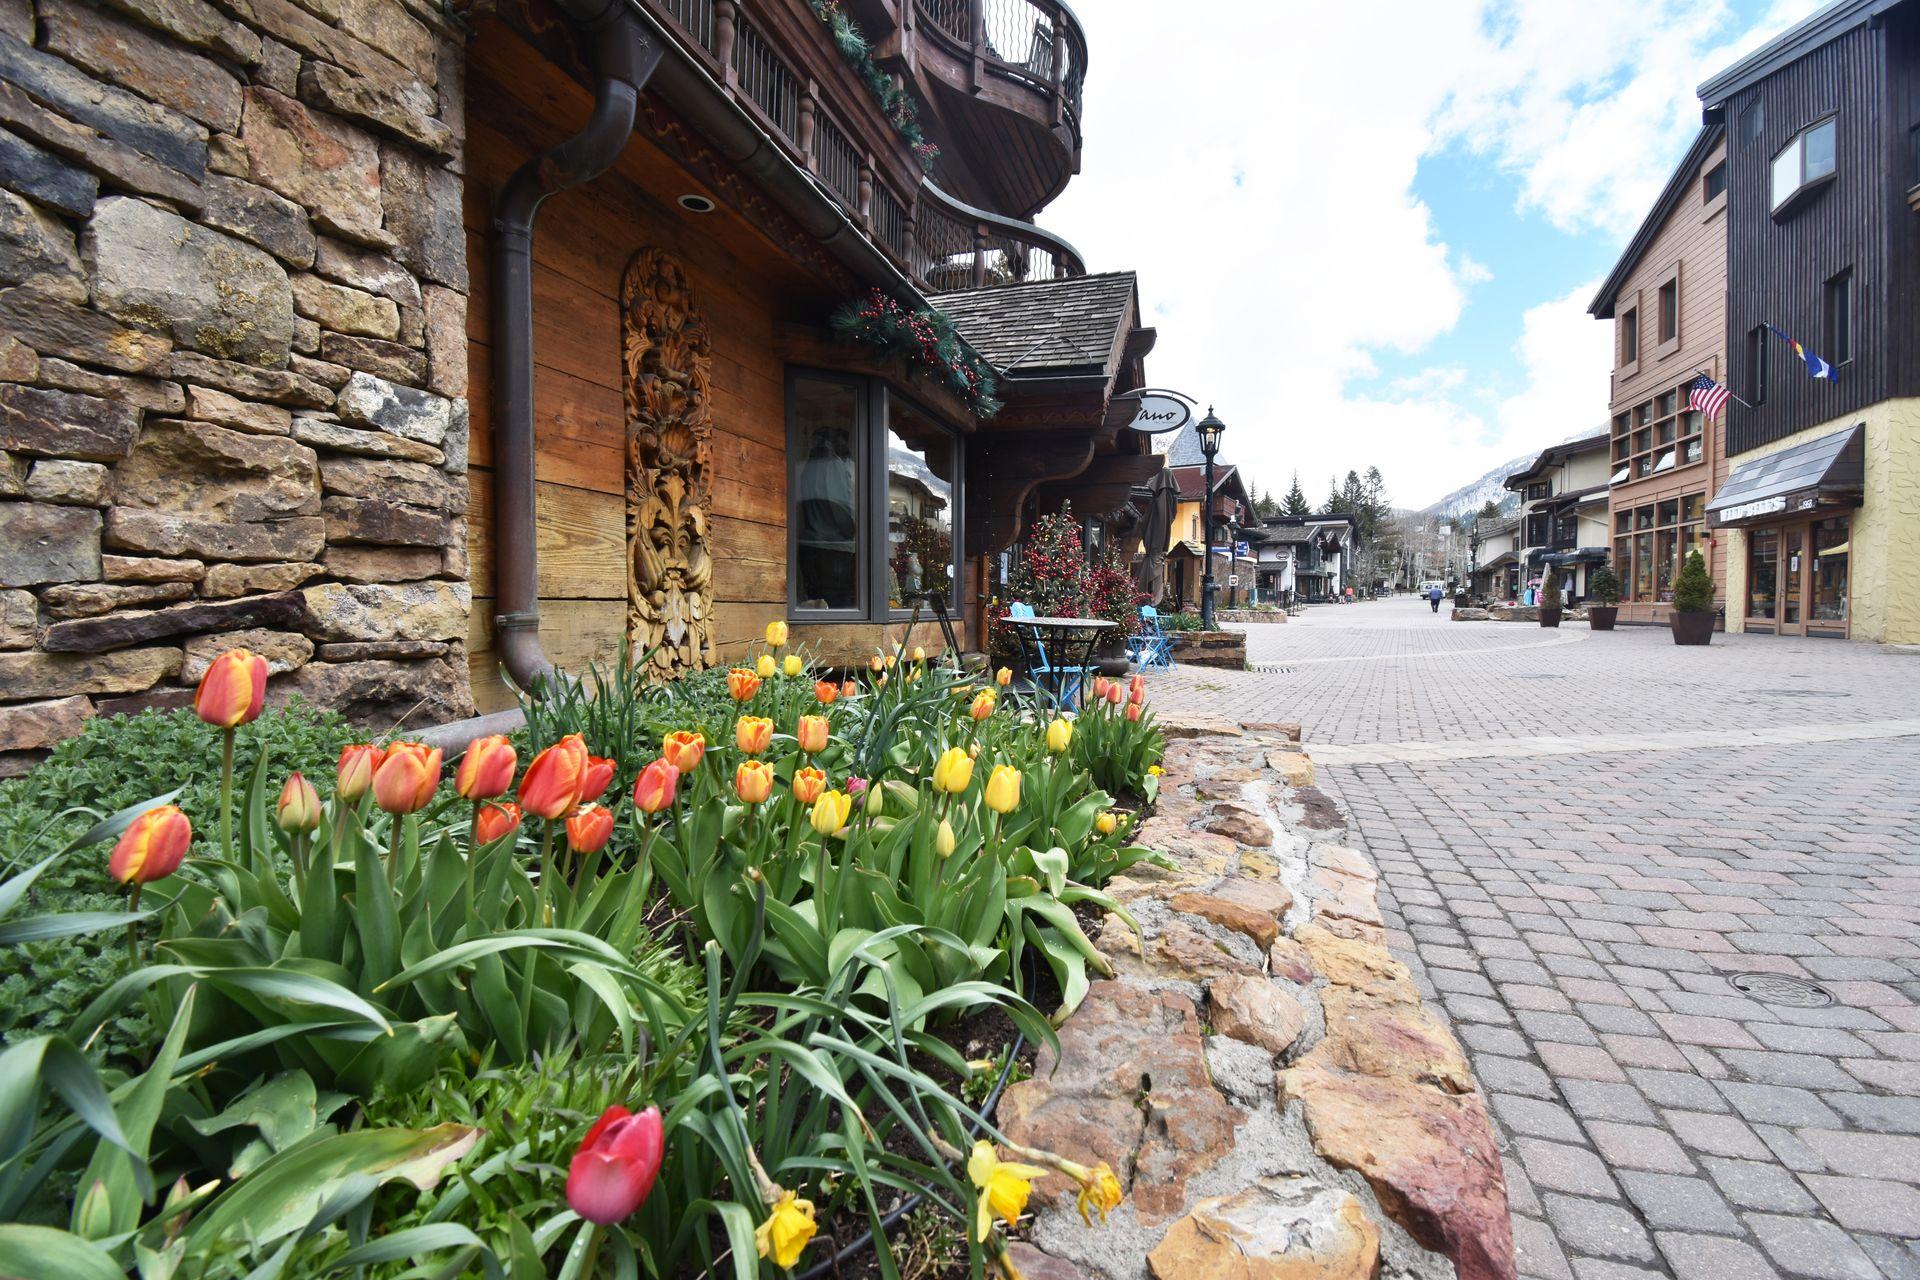 A view of tulips in a planter in the town of Vail.